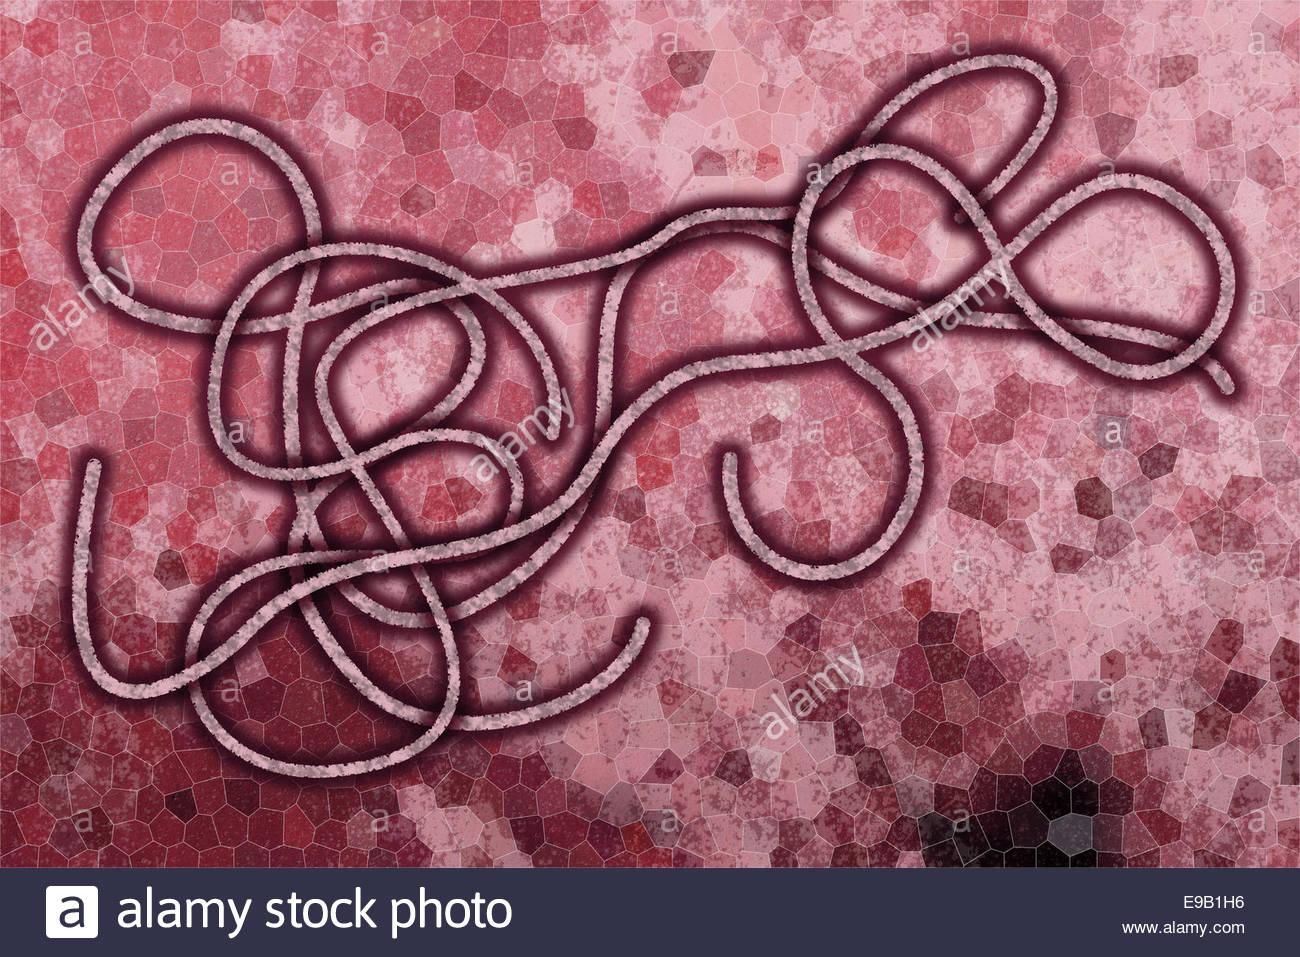 Graphic Representation Of The Ebola Virus On Pink Background Stock